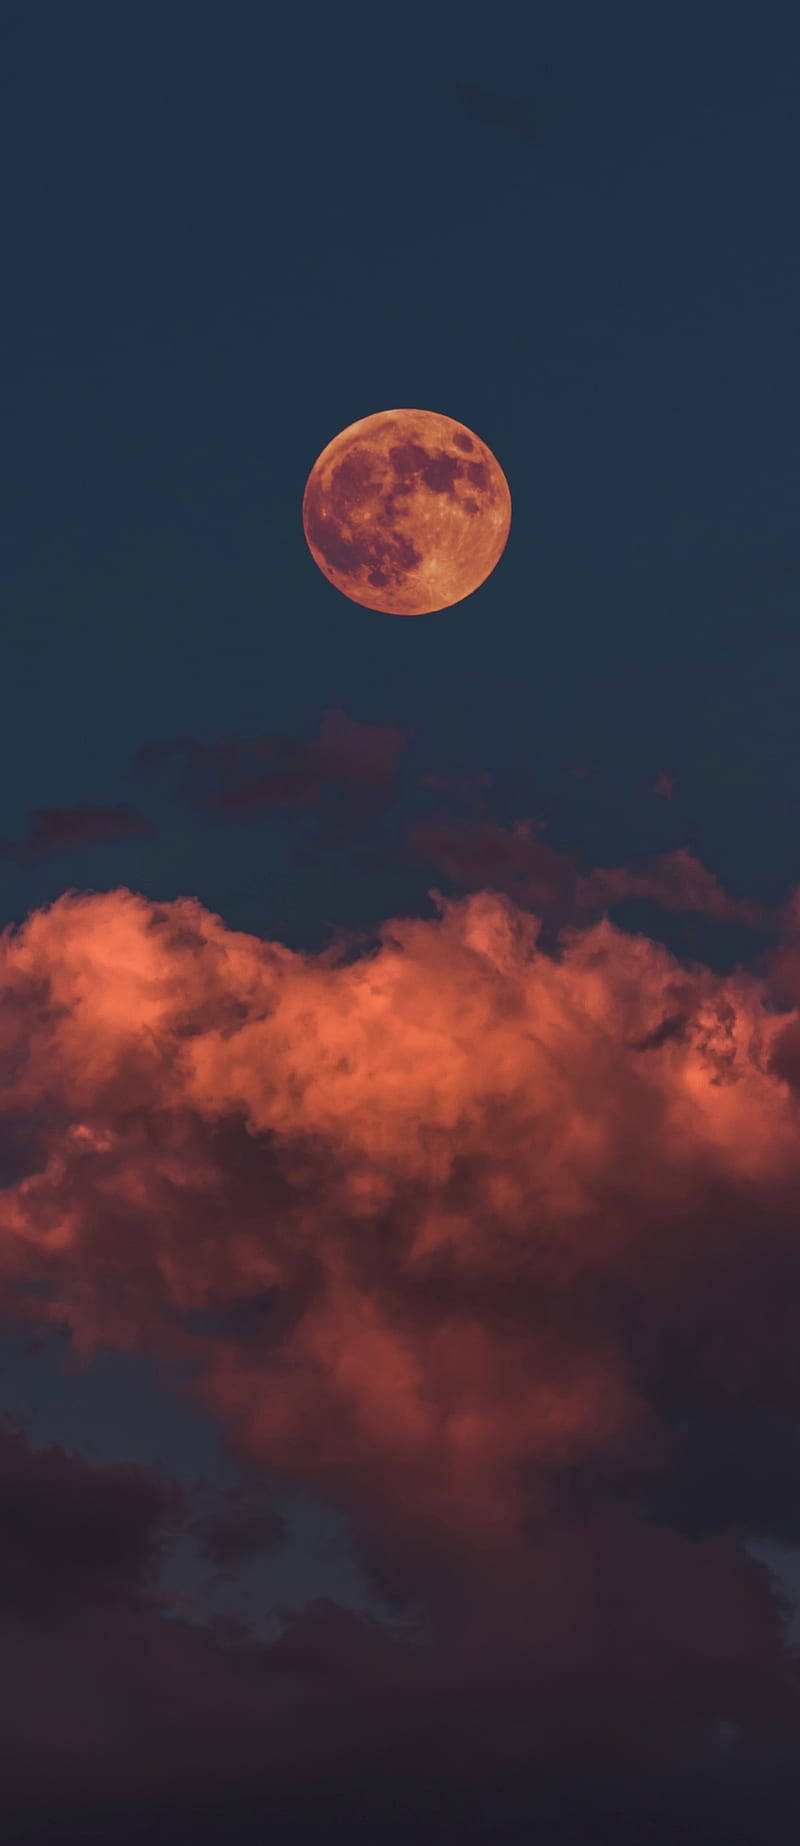 Iphone 11 Pro Red-tinged Moon Wallpaper